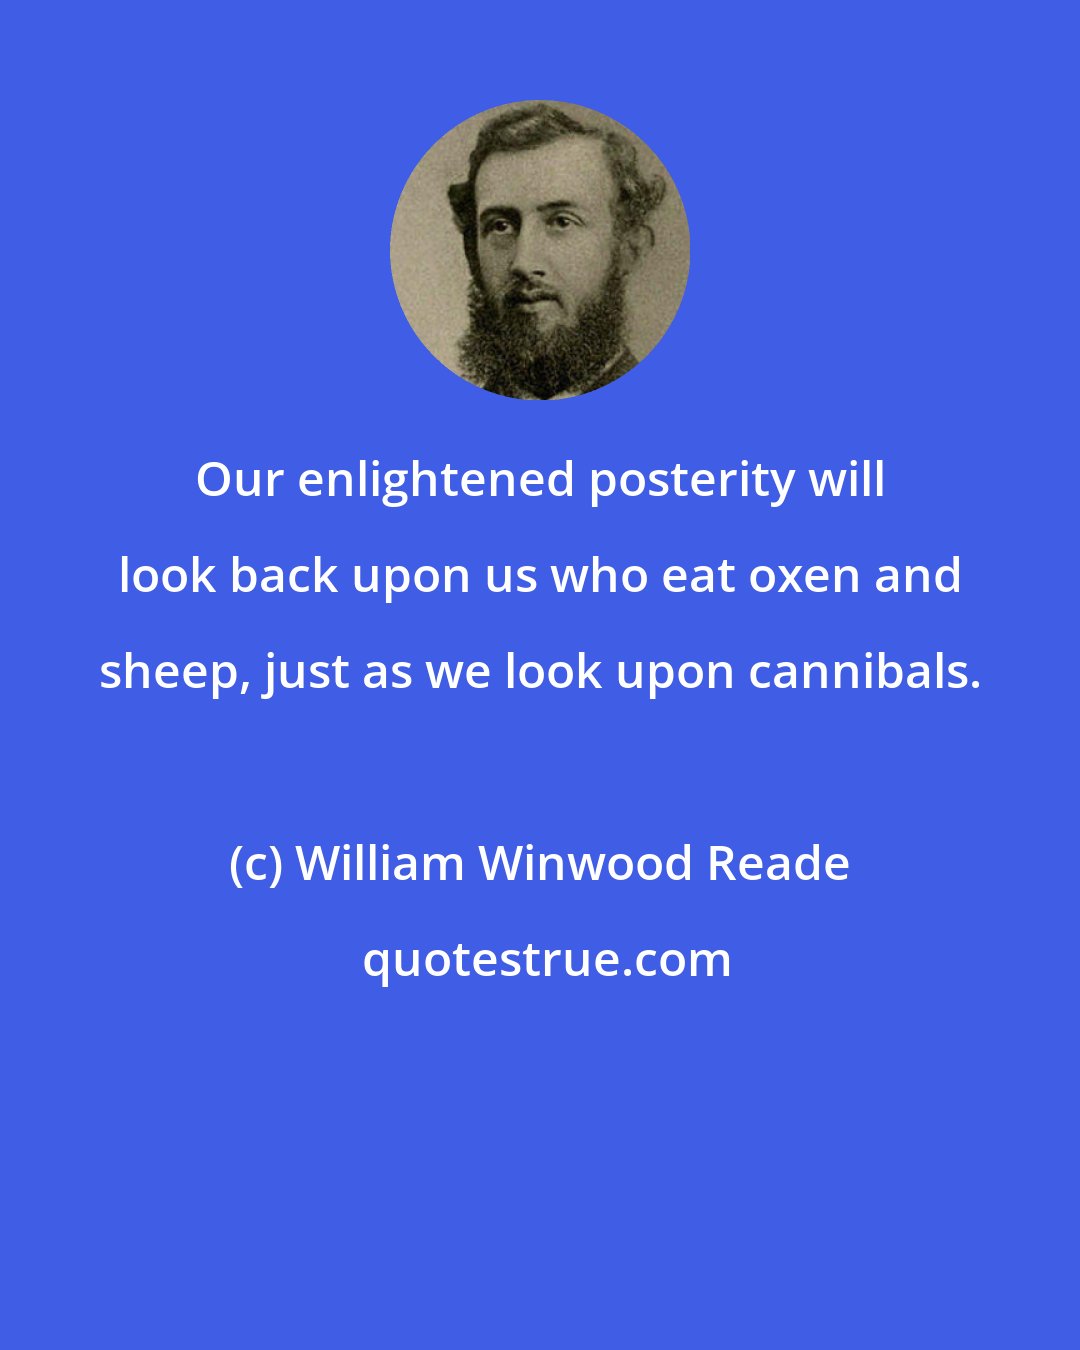 William Winwood Reade: Our enlightened posterity will look back upon us who eat oxen and sheep, just as we look upon cannibals.